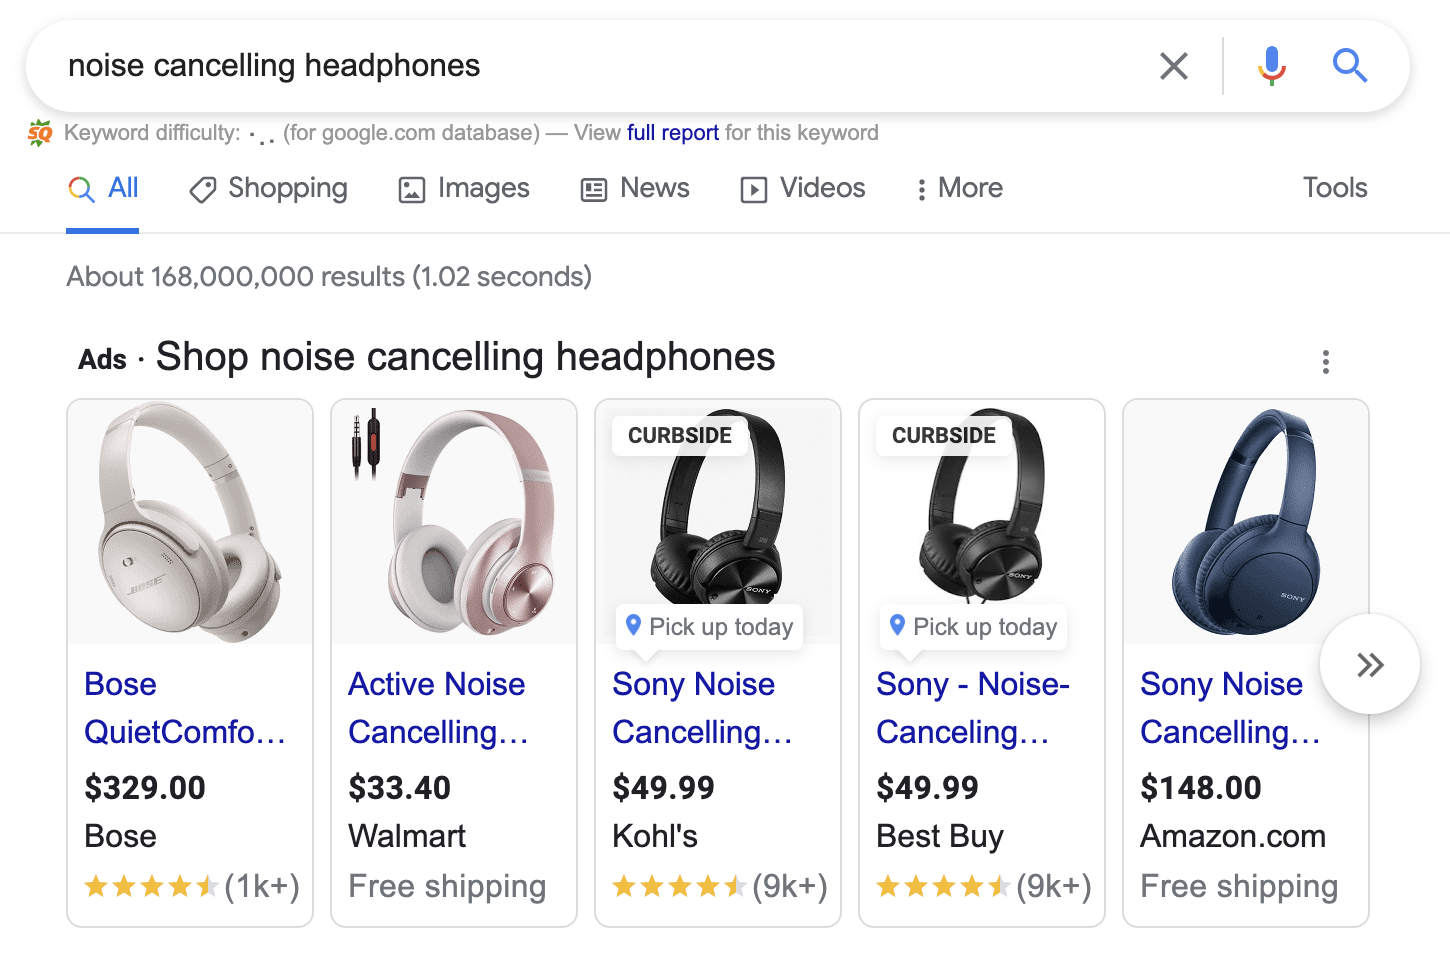 product rich snippet example of noise cancelling headphones